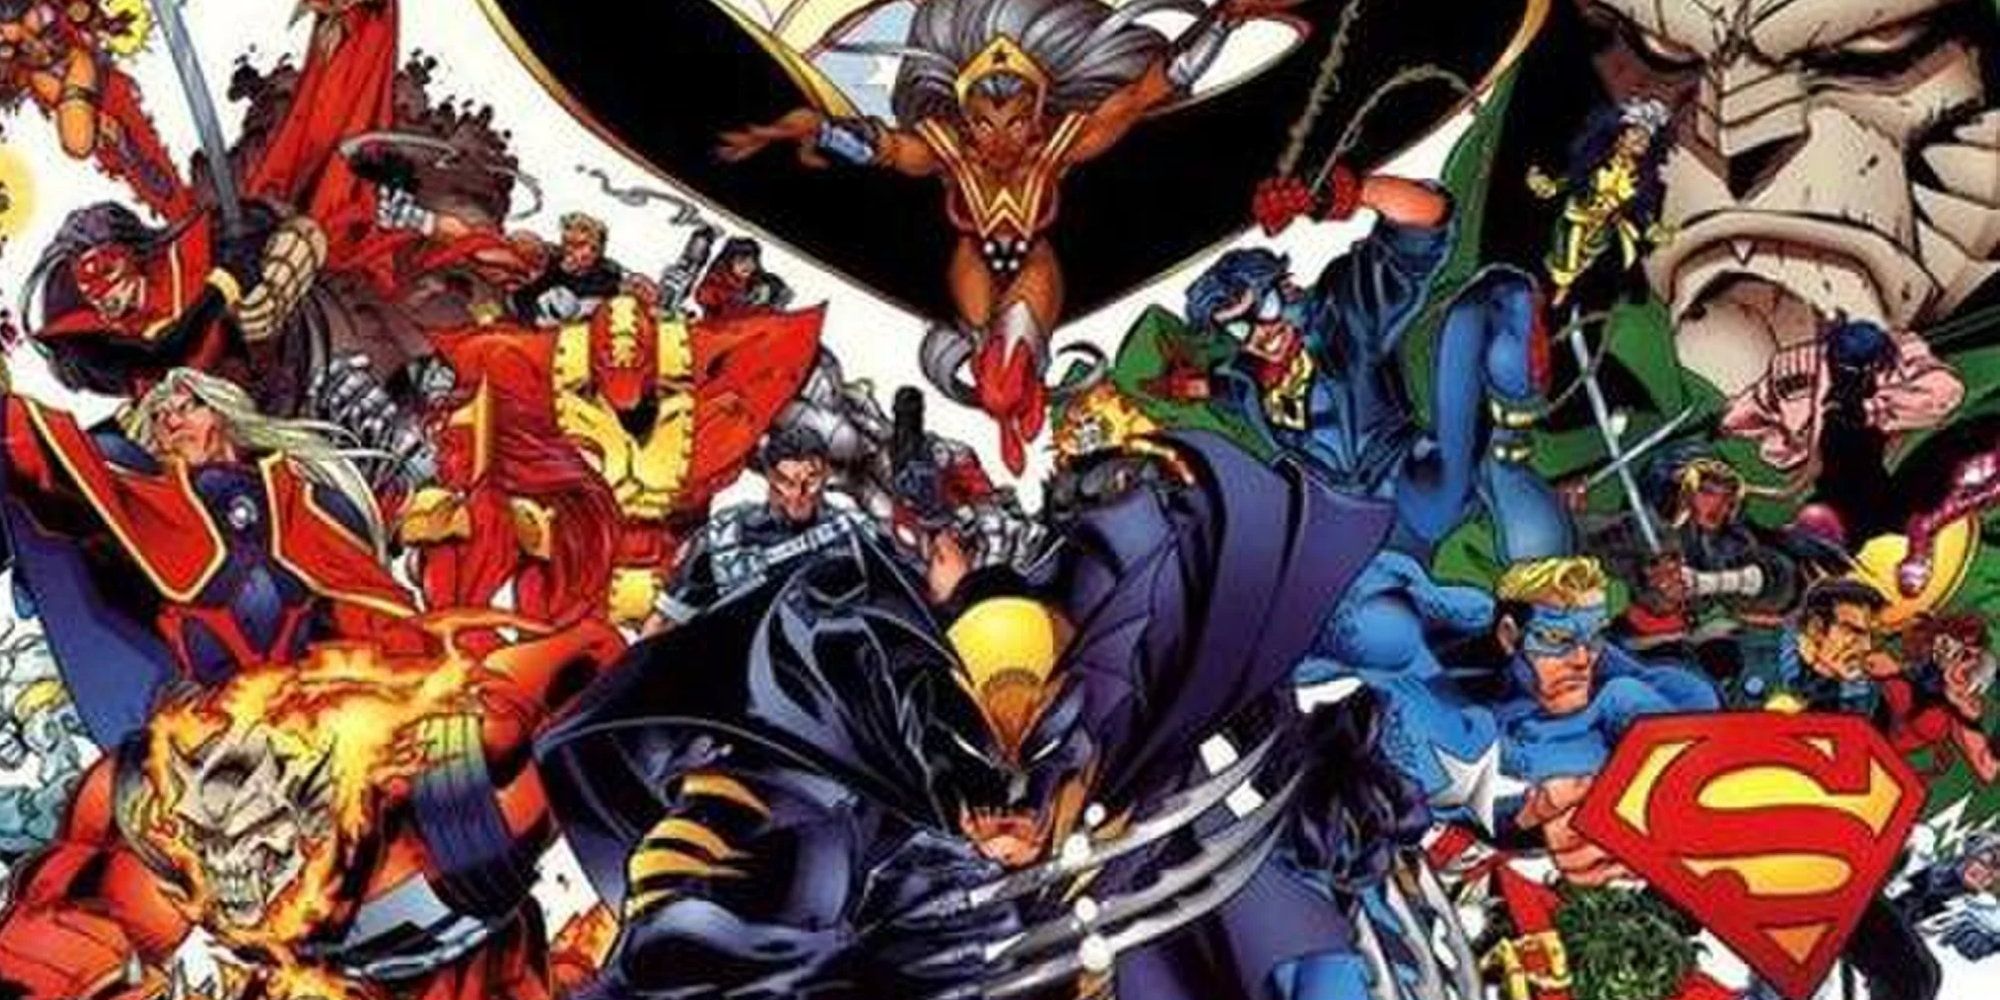 A group shot depicts several characters from the Amalgam comics.